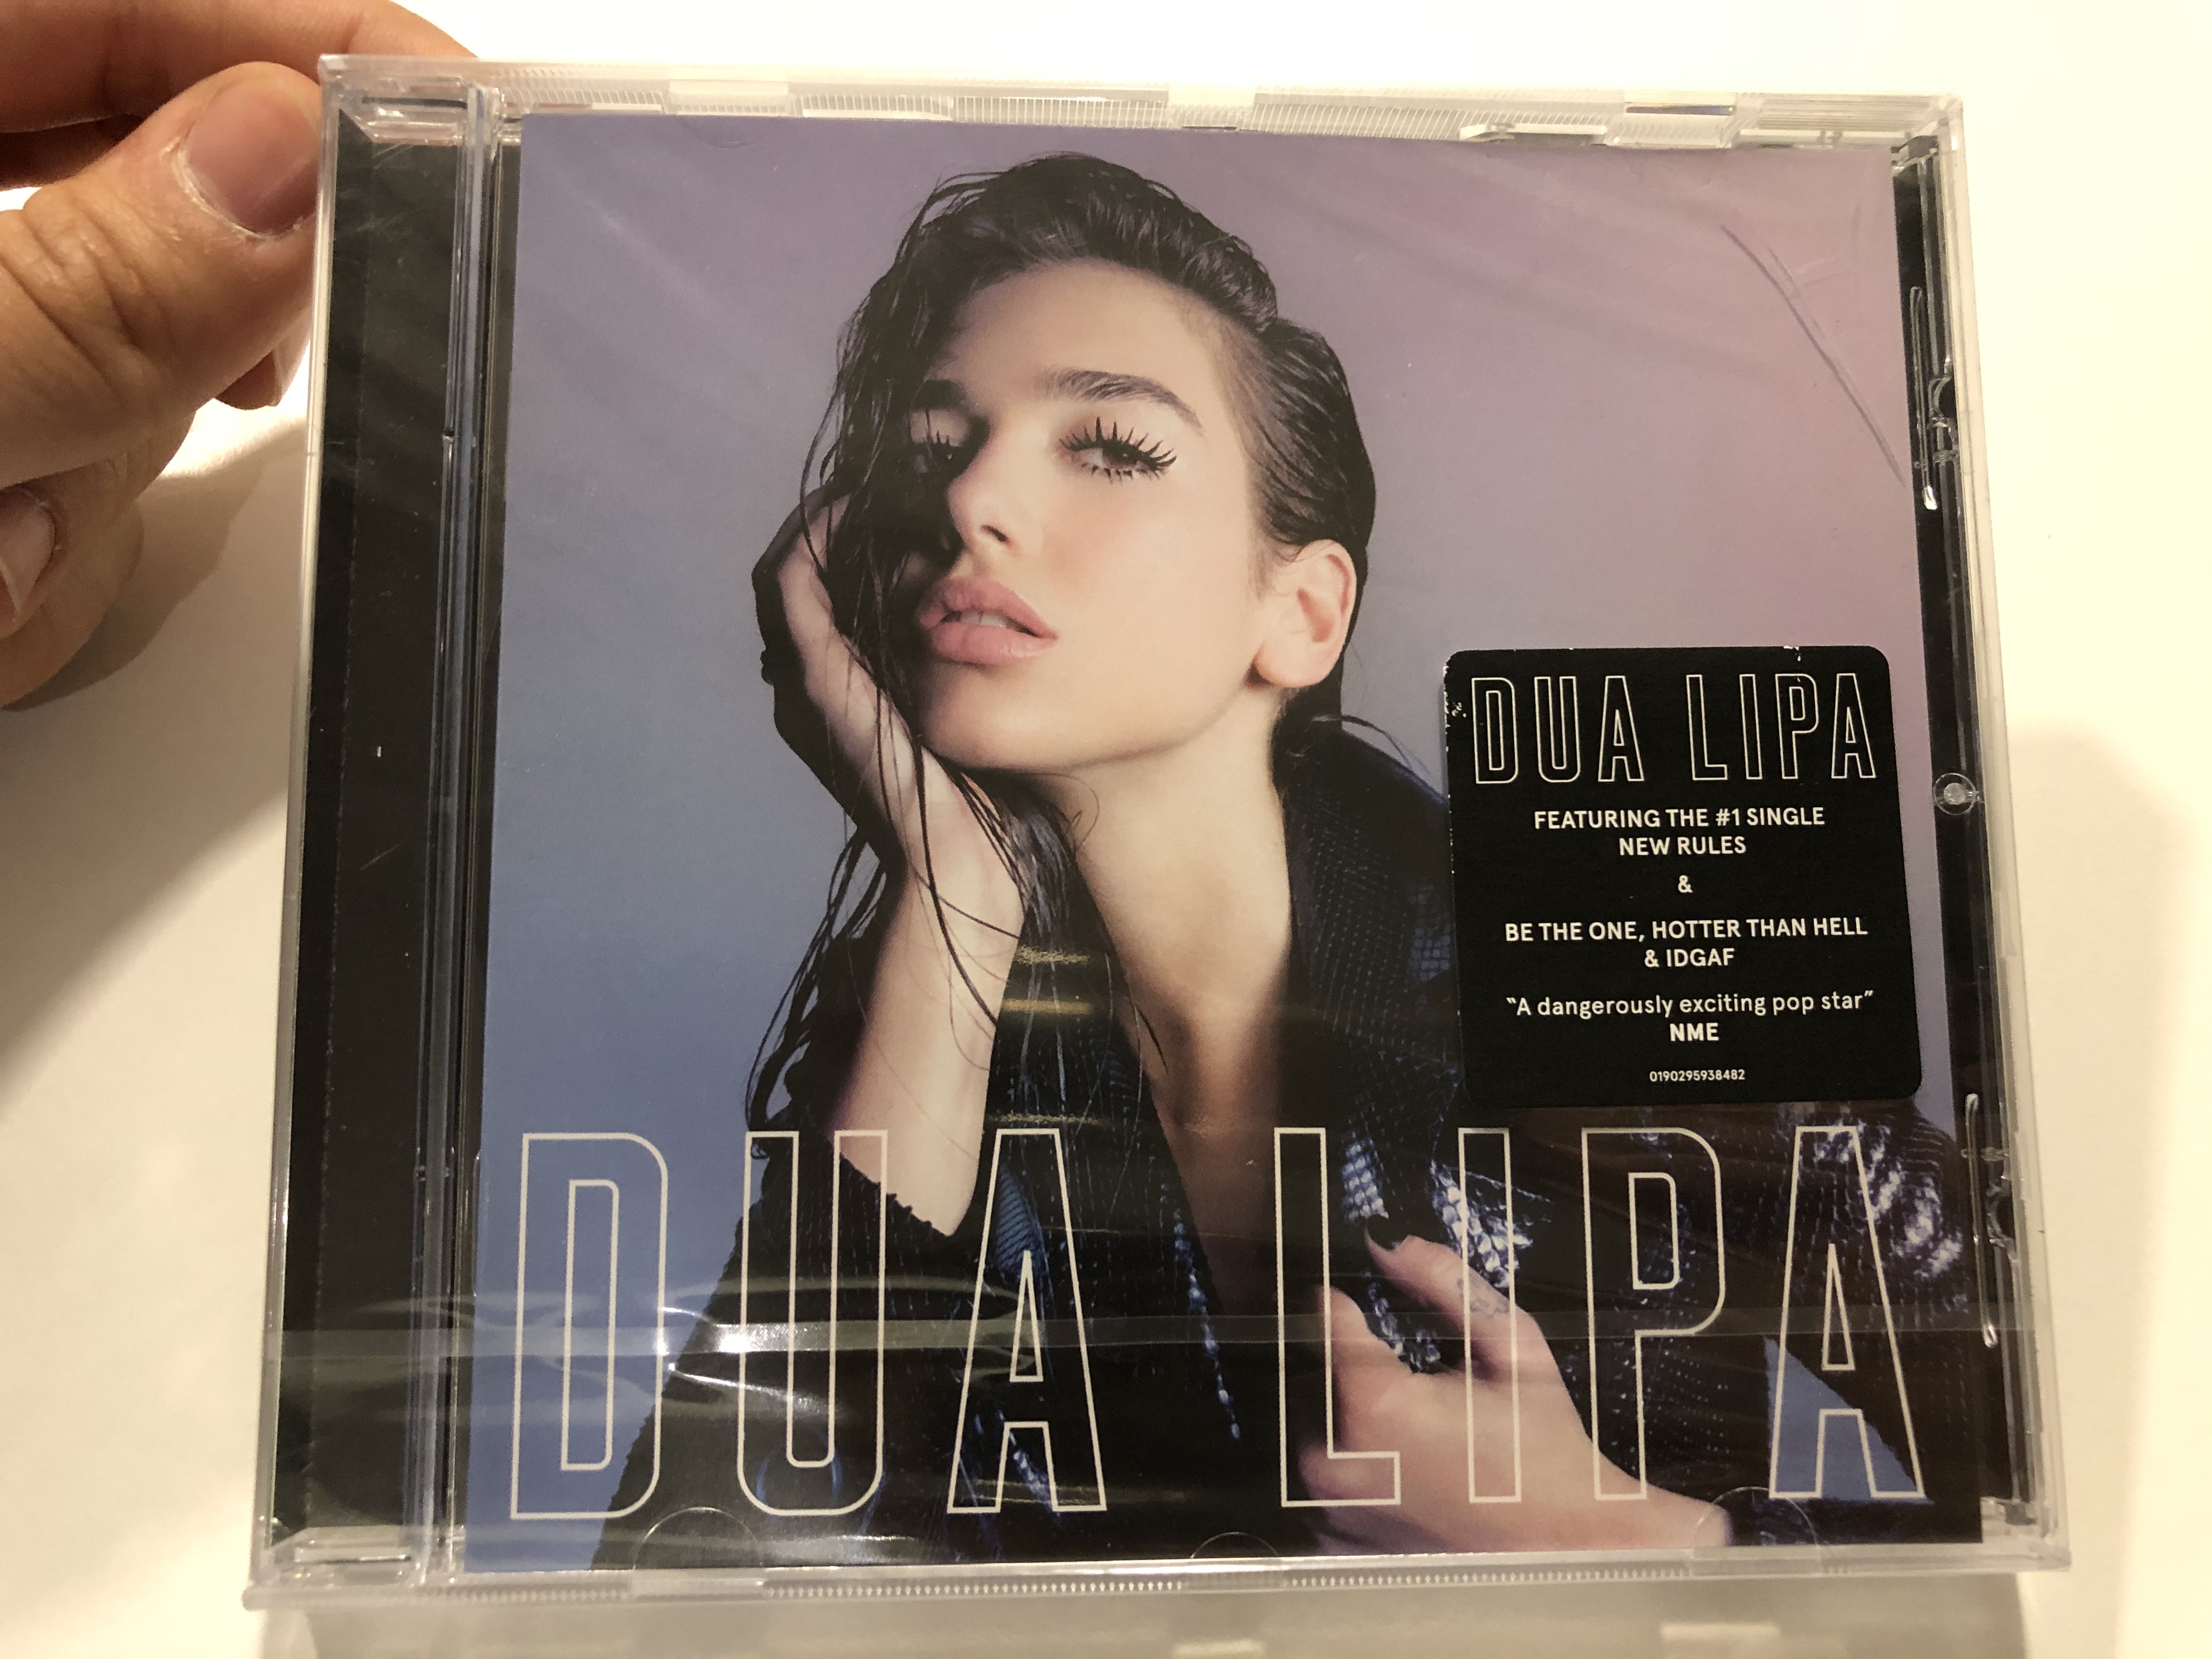 dua-lipa-featuring-the-1-single-new-rules-be-the-one-hotter-than-hell-idgaf-warner-bros.-records-audio-cd-2017-0190295938482-1-.jpg